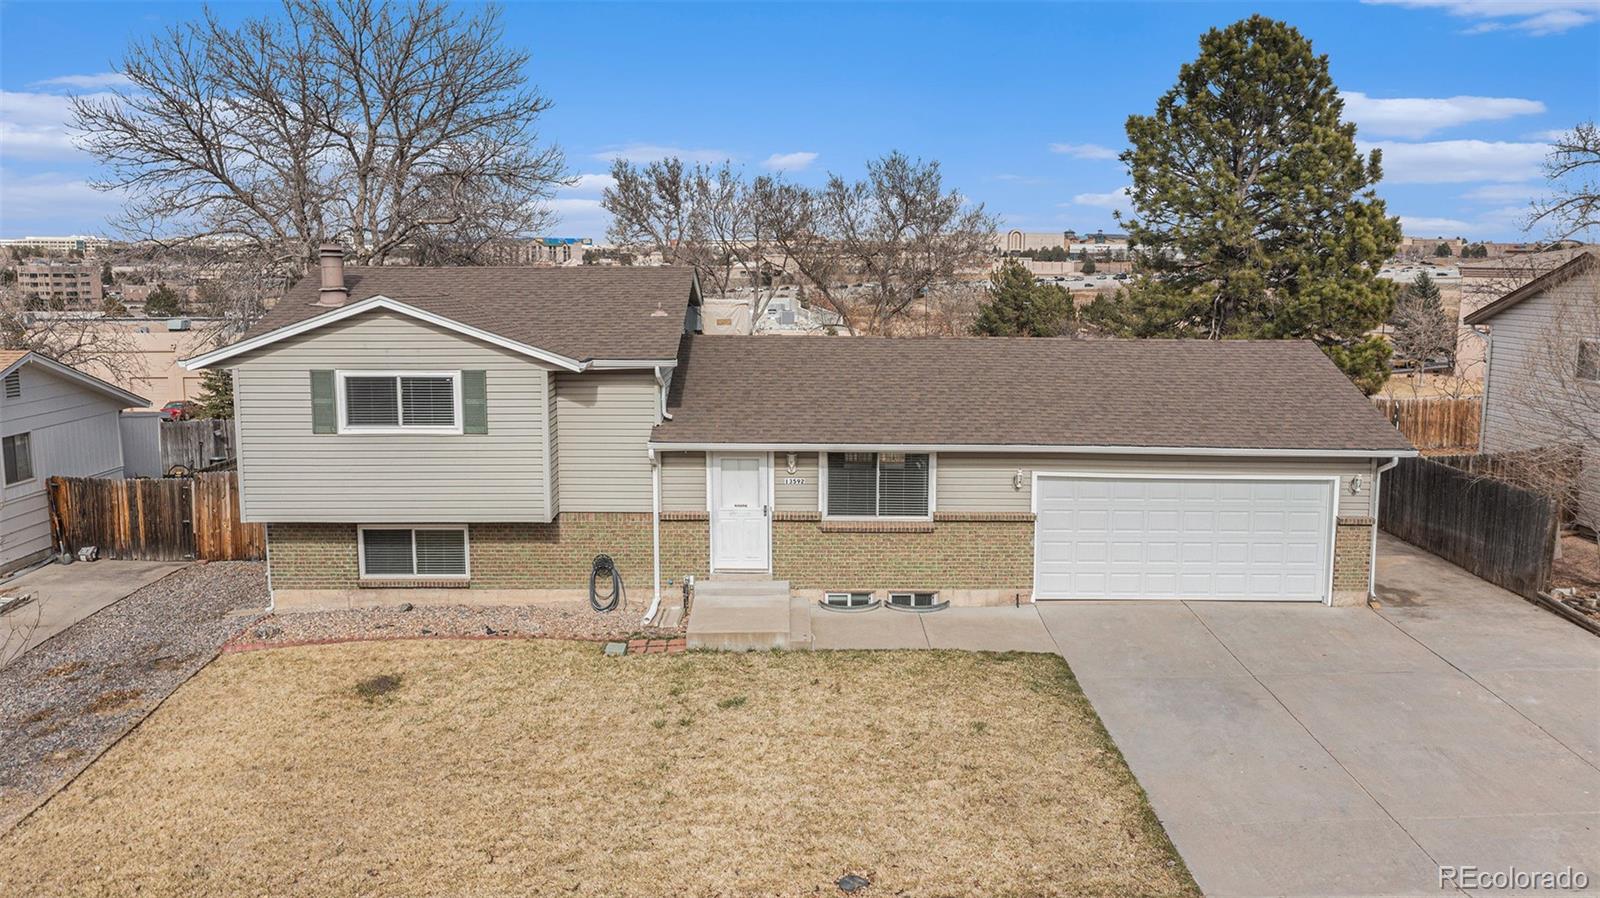 13592  Achilles Drive, lone tree MLS: 1682744 Beds: 3 Baths: 2 Price: $565,000